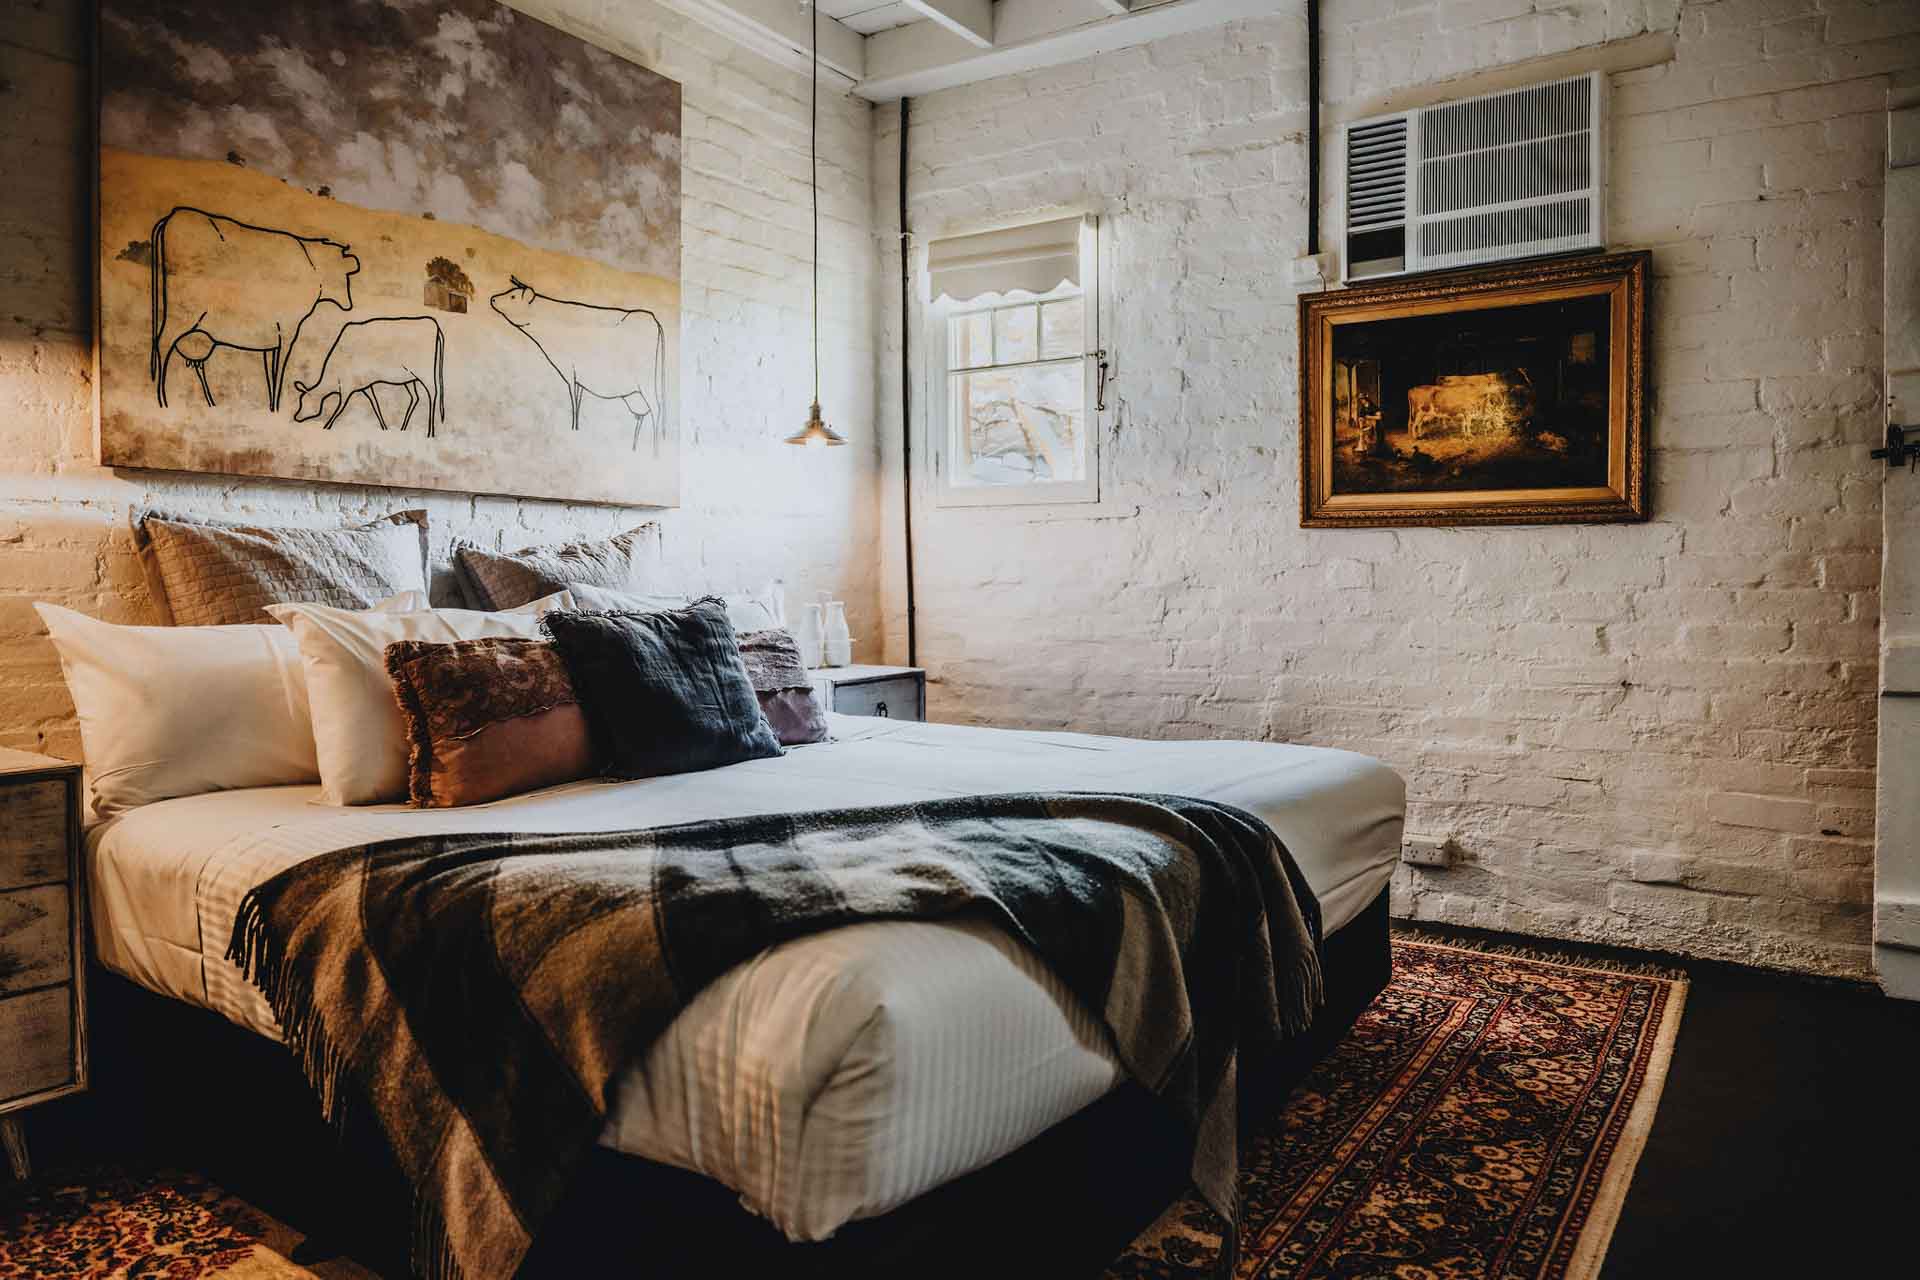 The Dairy, Castlemaine Boutique Accomodation